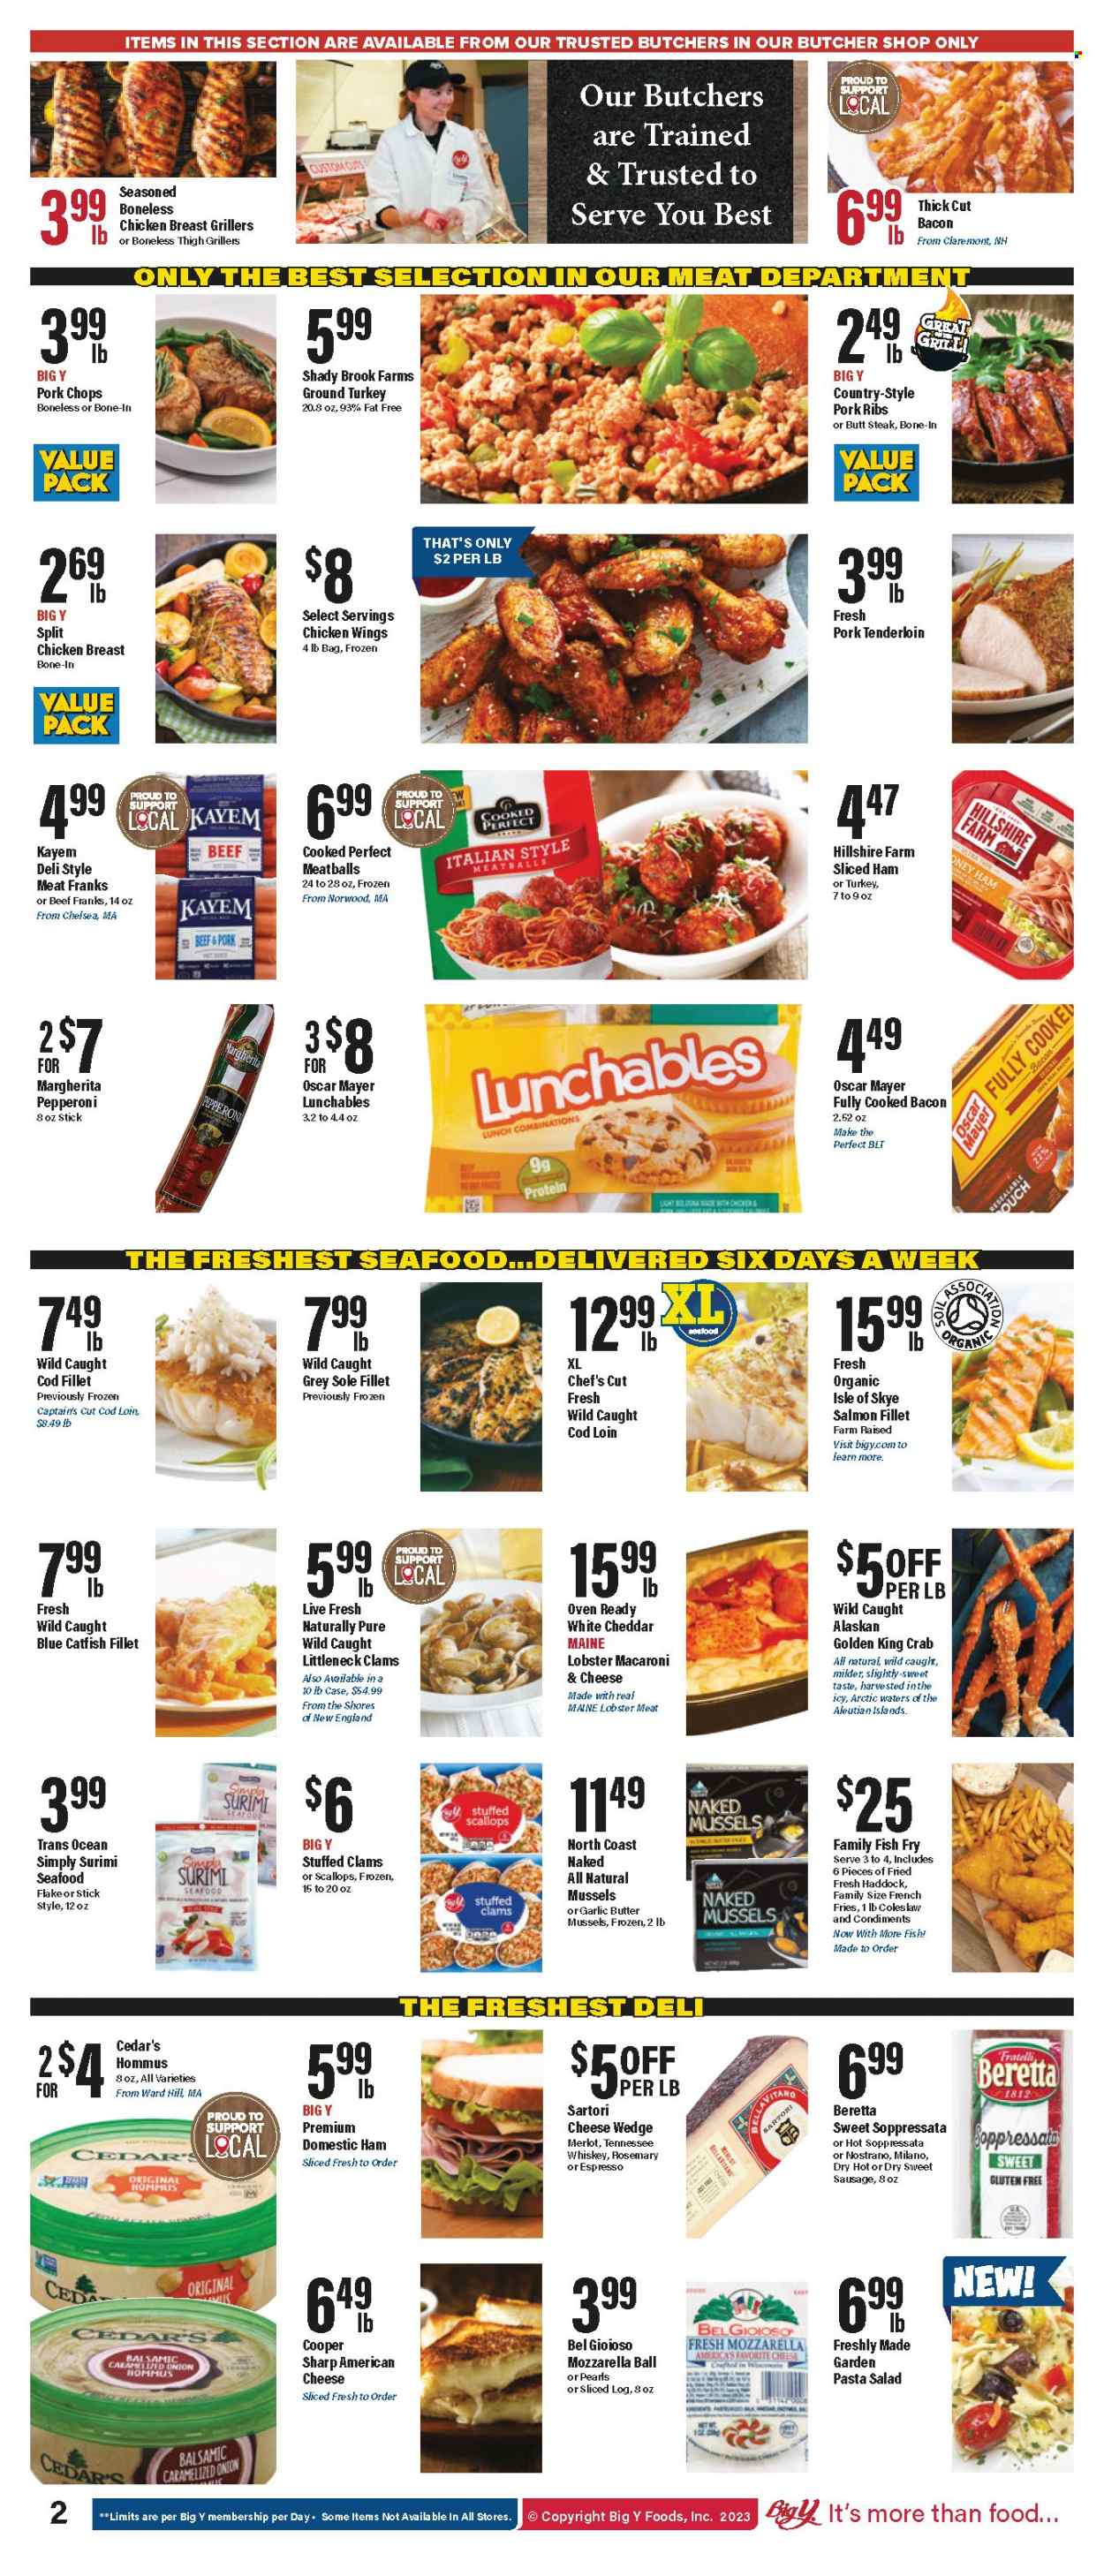 thumbnail - Big Y Flyer - 06/01/2023 - 06/07/2023 - Sales products - onion, salad, catfish, clams, cod, lobster, mussels, salmon, salmon fillet, scallops, haddock, king crab, seafood, crab, fish, fried fish, coleslaw, meatballs, pasta, Lunchables, bacon, soppressata, ham, Hillshire Farm, bologna sausage, Oscar Mayer, pepperoni, frankfurters, hummus, pasta salad, american cheese, chicken wings, potato fries, french fries, rosemary, red wine, wine, Merlot, Tennessee Whiskey, whiskey, whisky, ground turkey, chicken breasts, chicken, turkey, steak, ribs, pork chops, pork meat, pork ribs, pork tenderloin. Page 3.